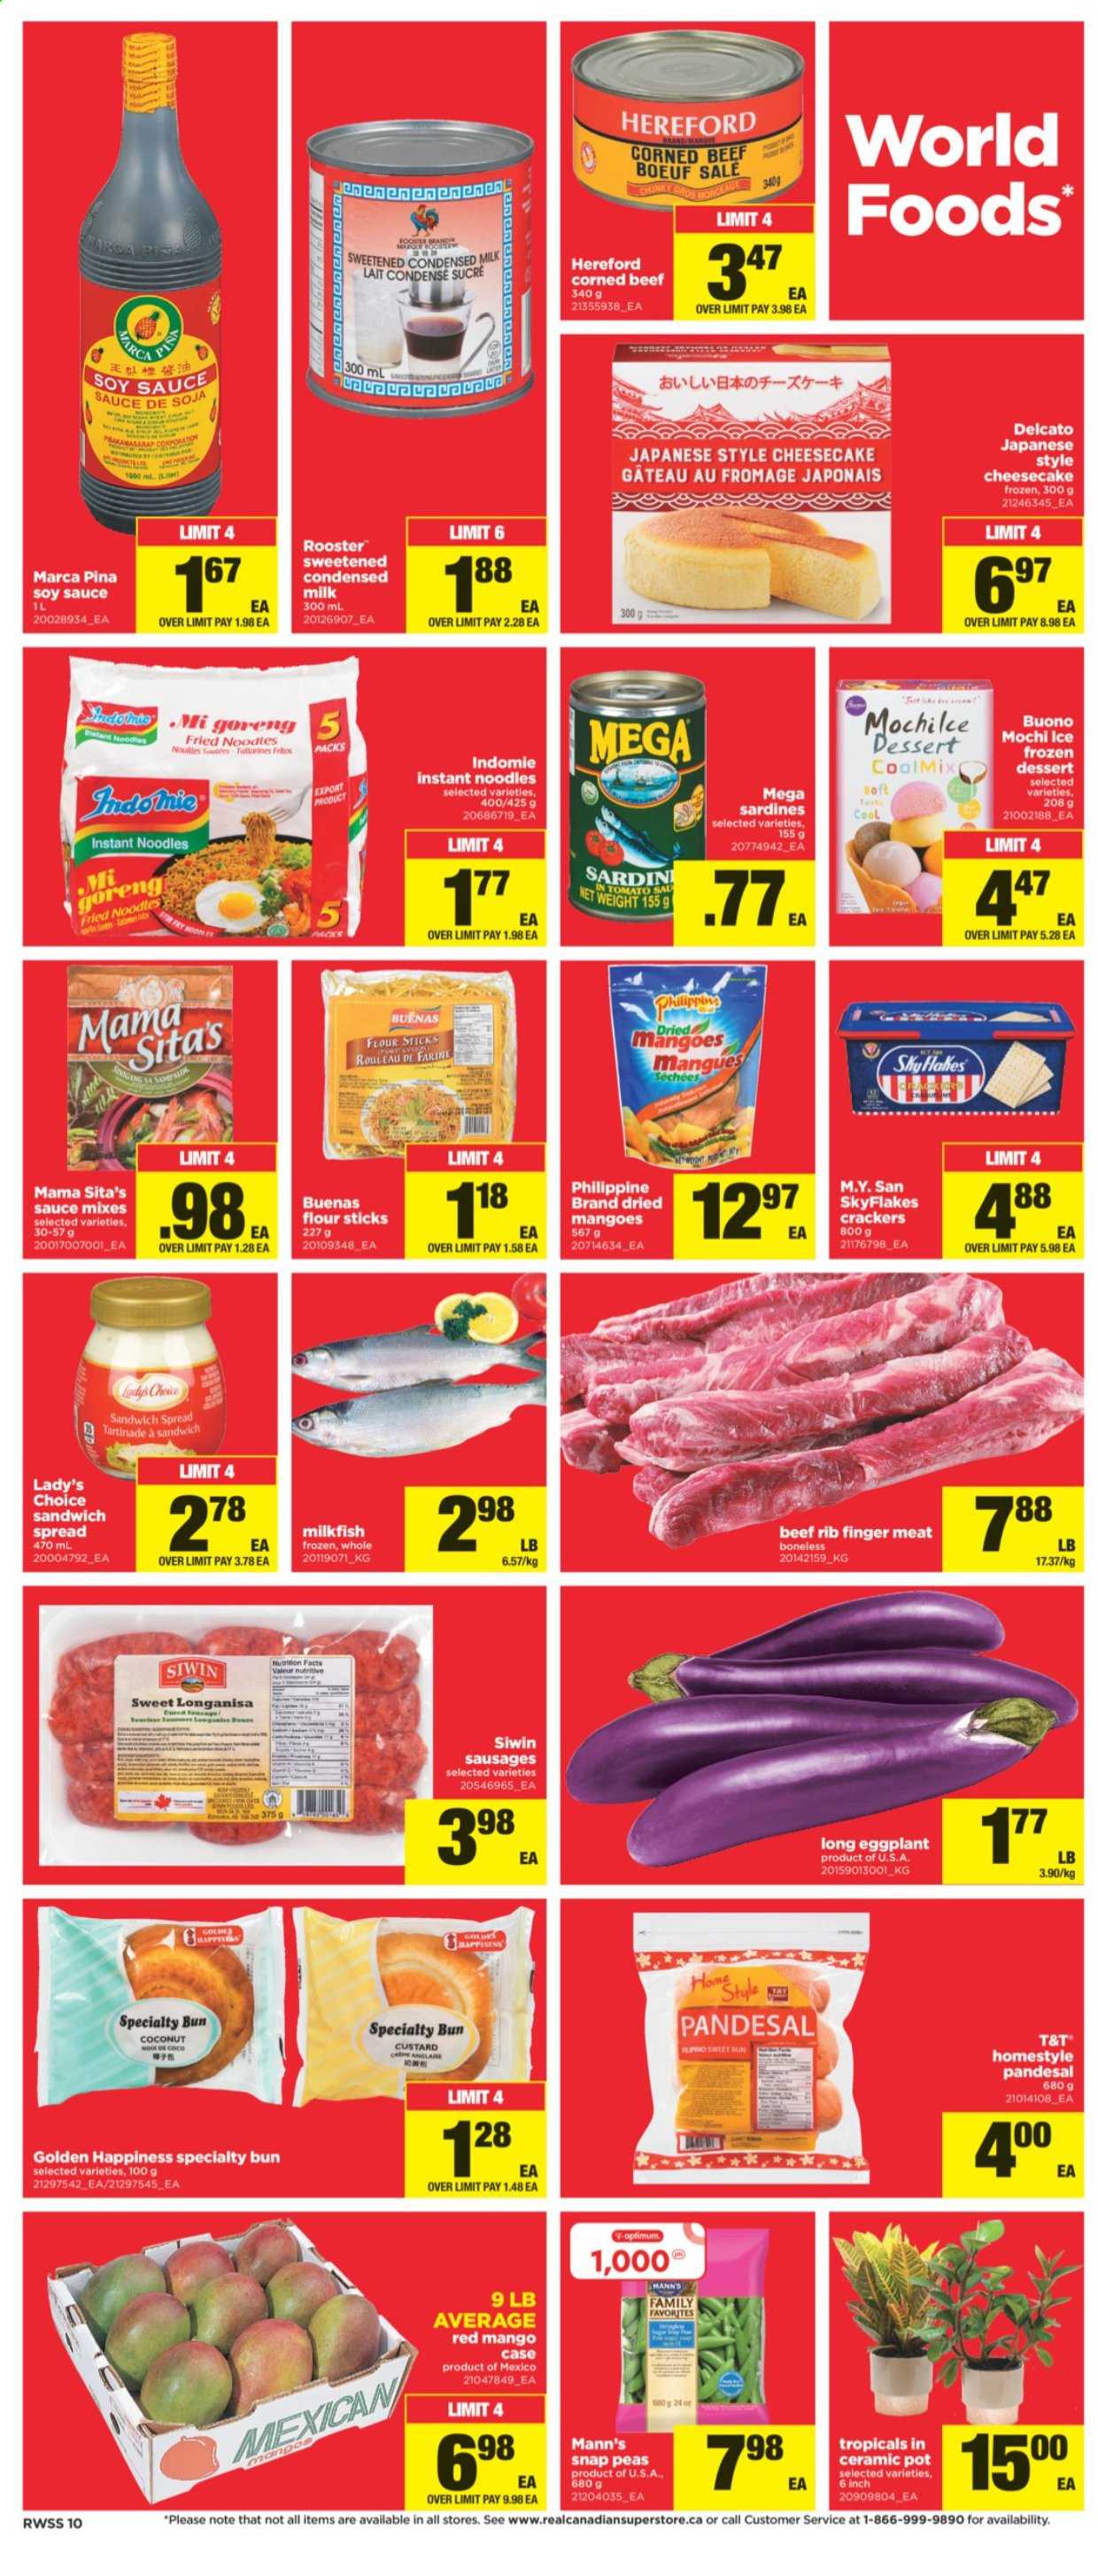 Real Canadian Superstore flyer  - July 23, 2021 - July 29, 2021.